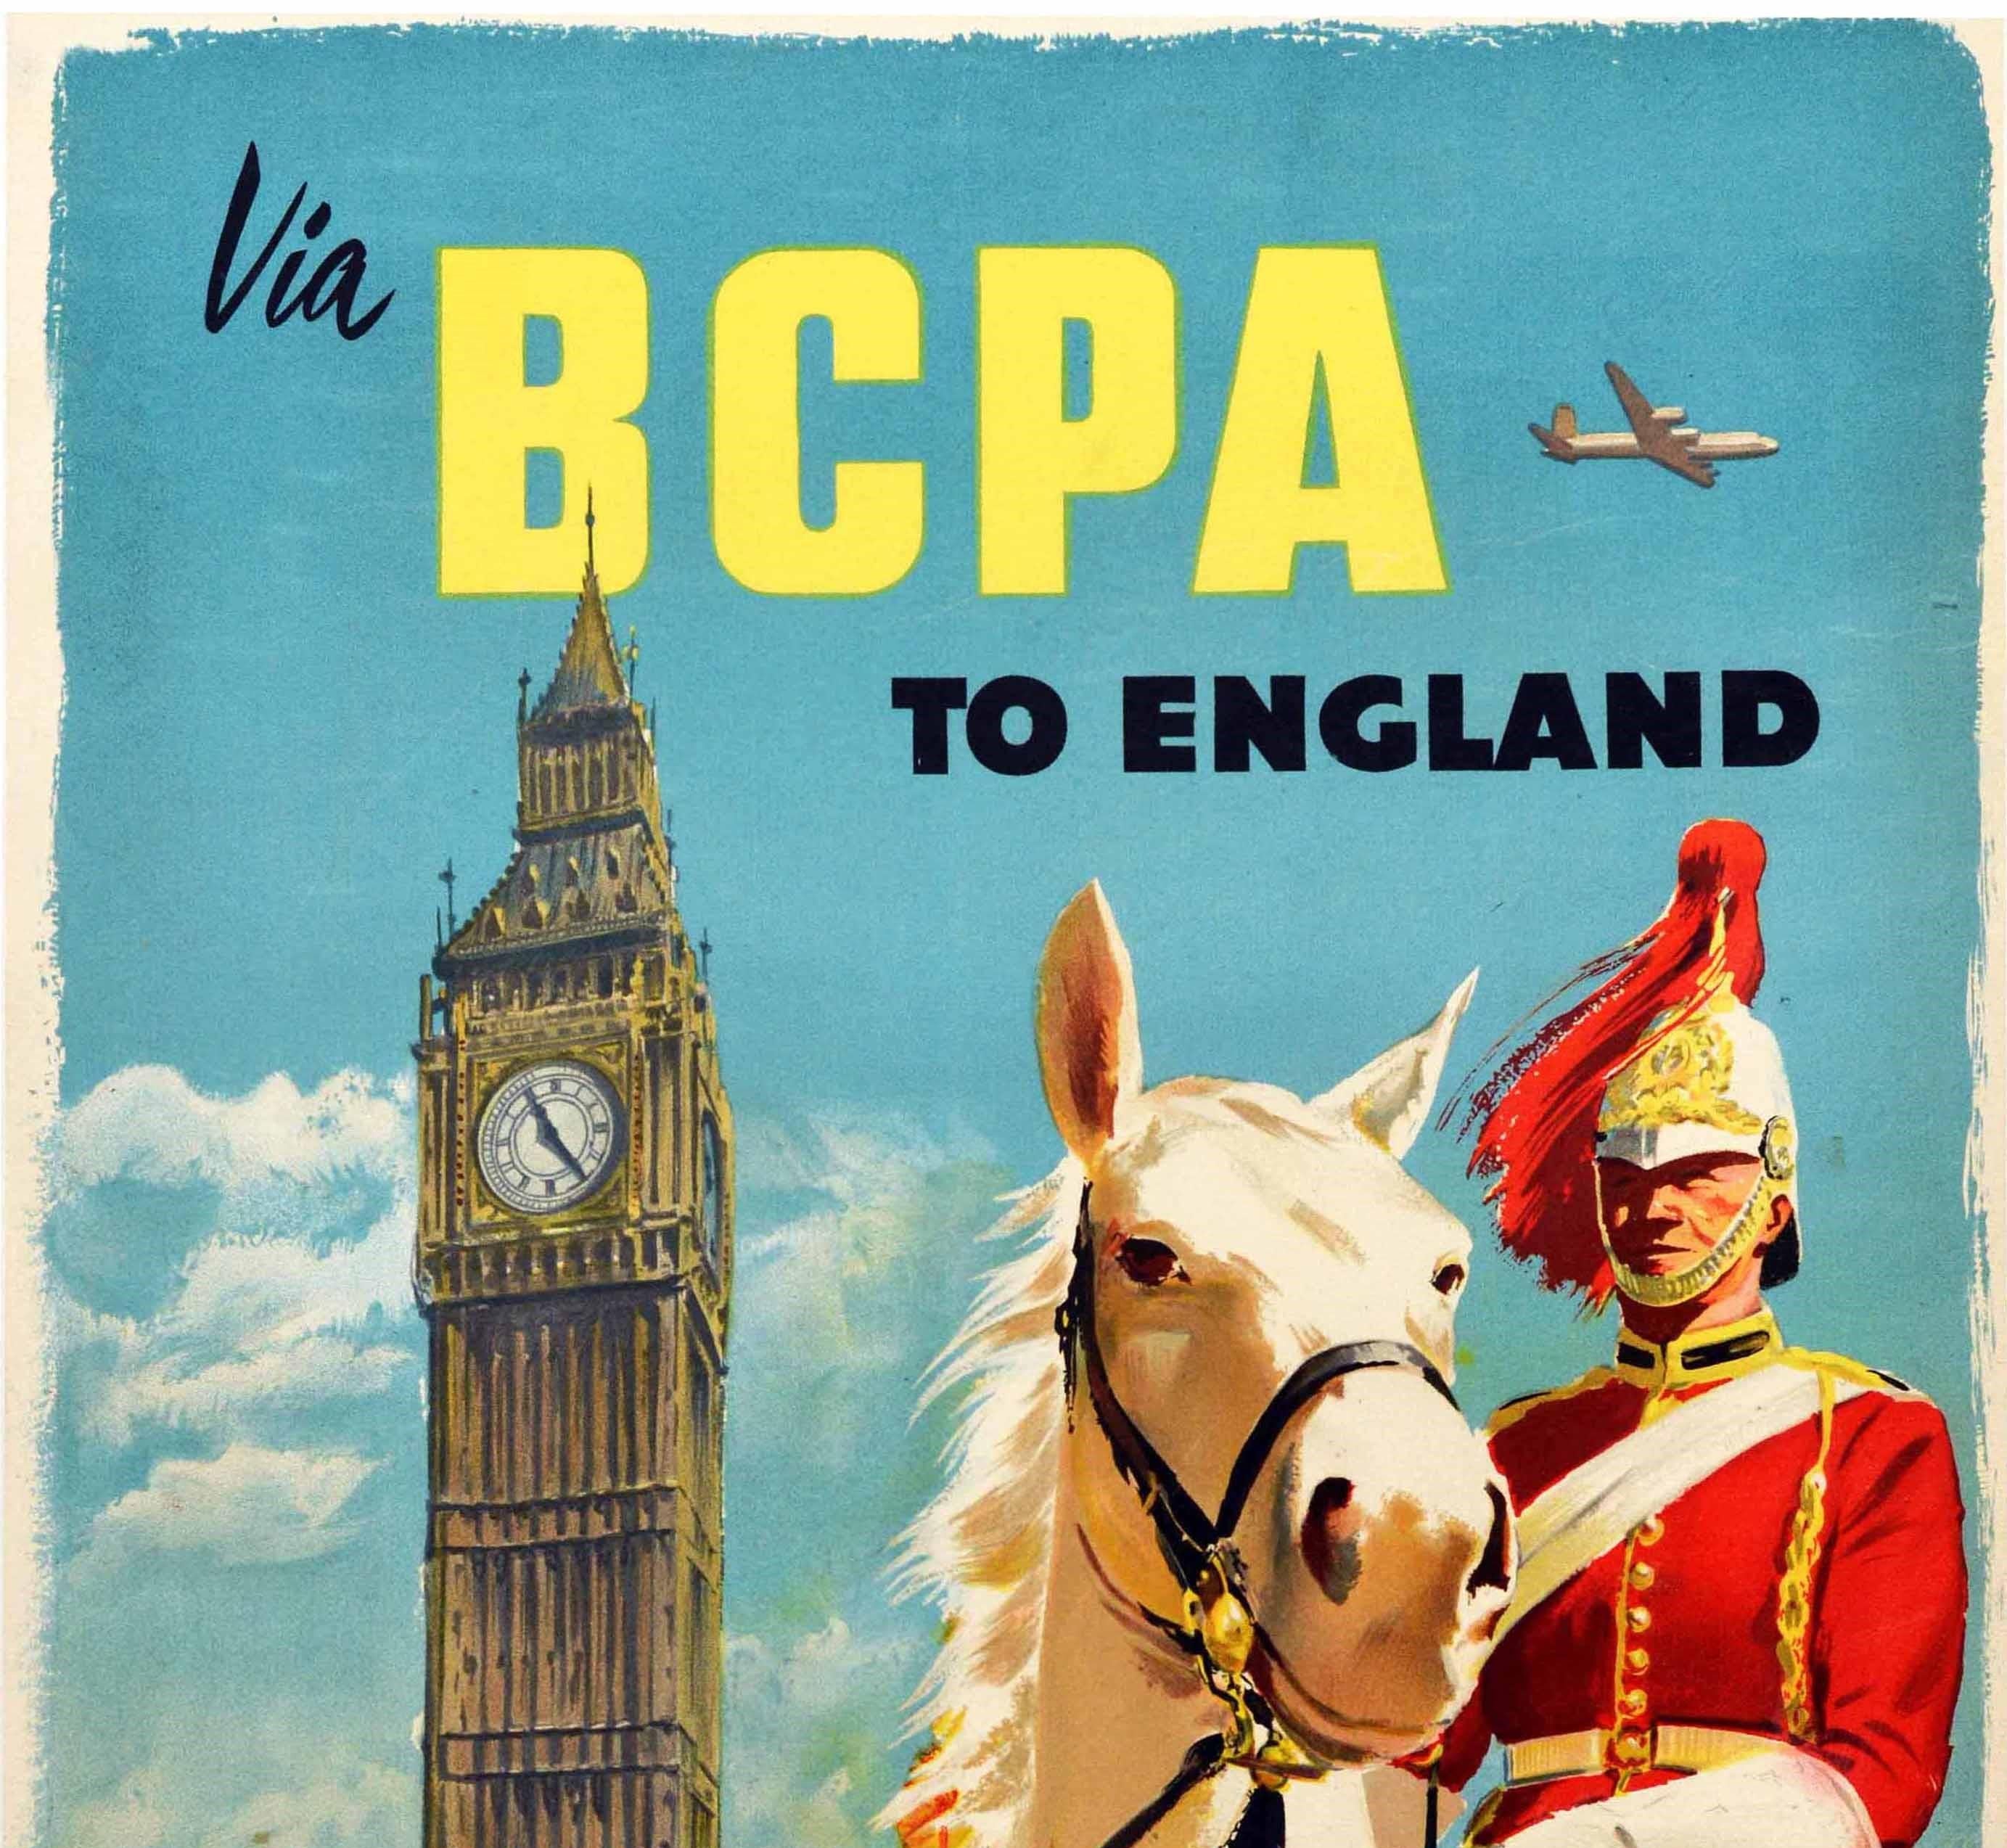 Original vintage travel poster advertising British Commonwealth Pacific Airlines flights to England - Via BCPA to England. Design features an illustration of a mounted Royal Guard on a white horse from the Household Cavalry Regiment in an iconic red